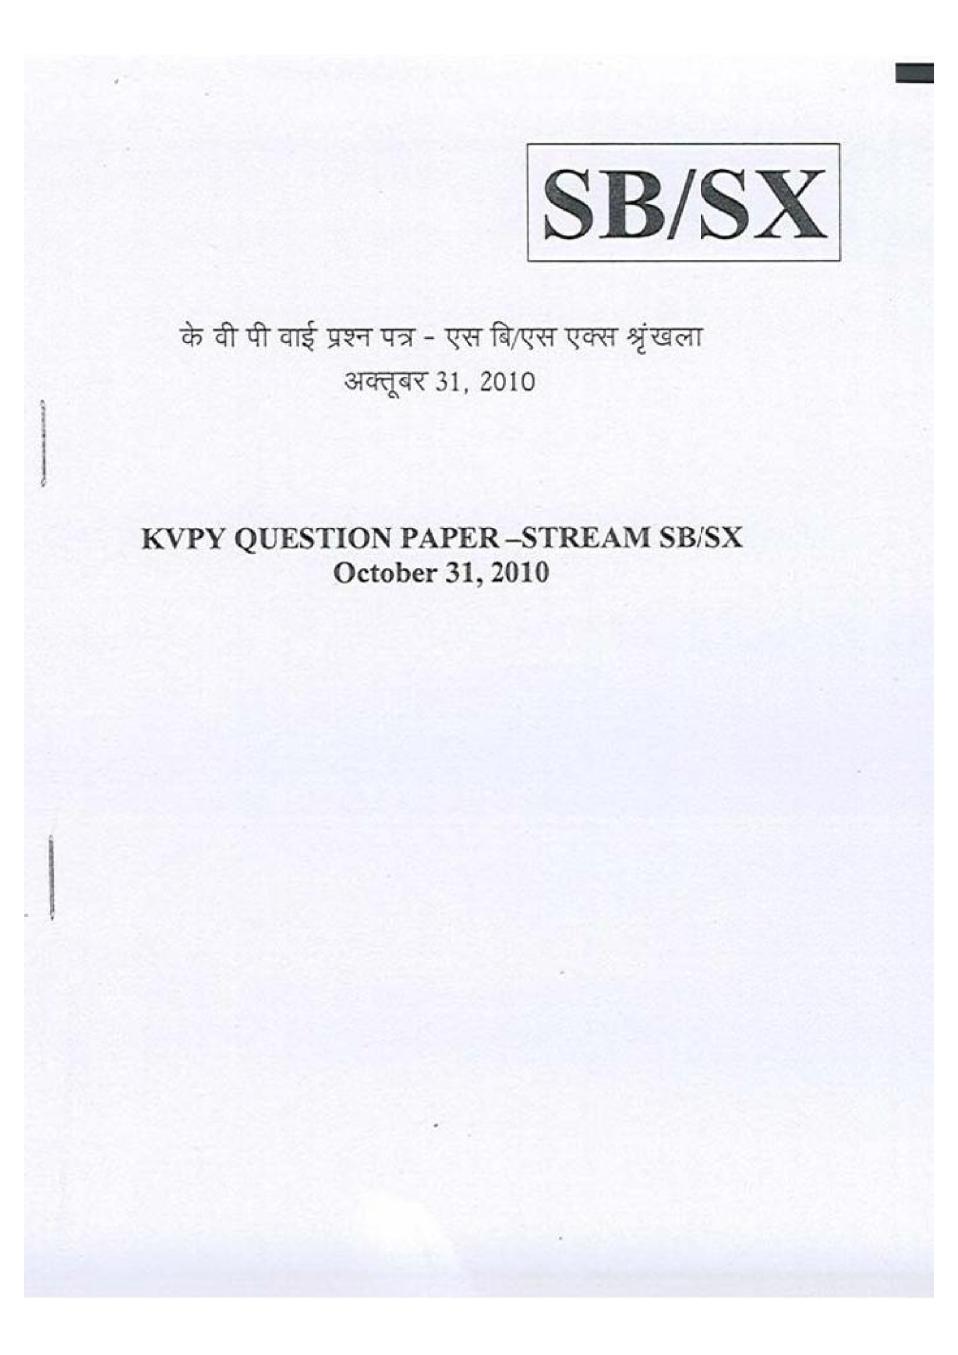 KVPY 2010 Question Paper with Answer Key for SB/SX Stream (Hindi Version) - Page 1